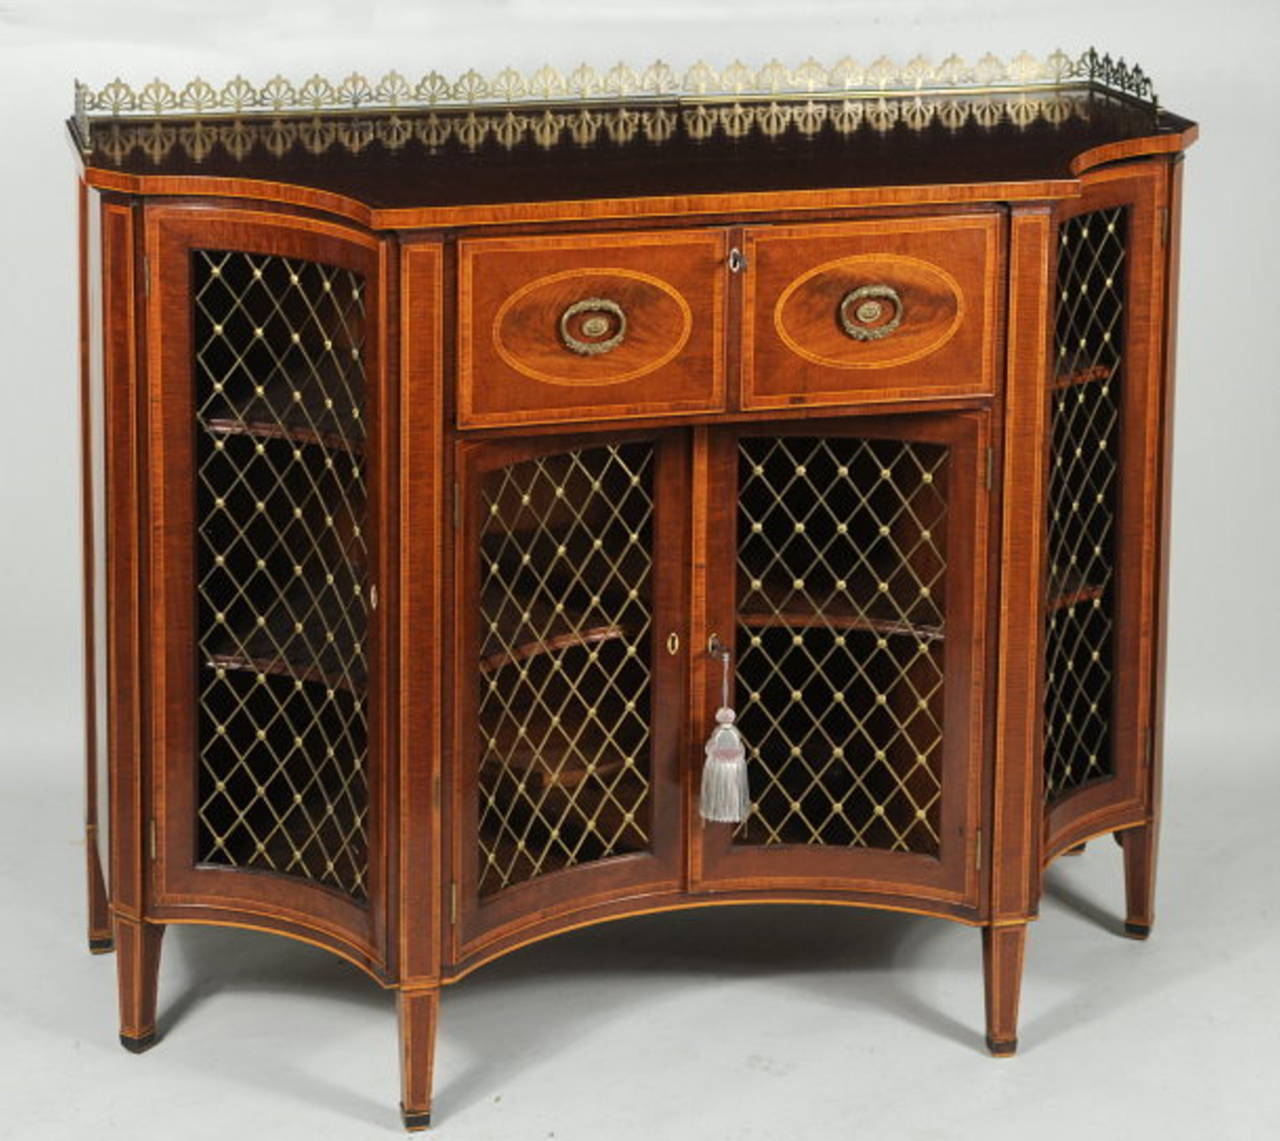 Very rare superb quality London made satinwood and inlaid butler's serving cabinet, with pierced brass galleried top above a central pull-out desk section with leather fold down writing board, above a pair of concave bronze grillwork central doors,